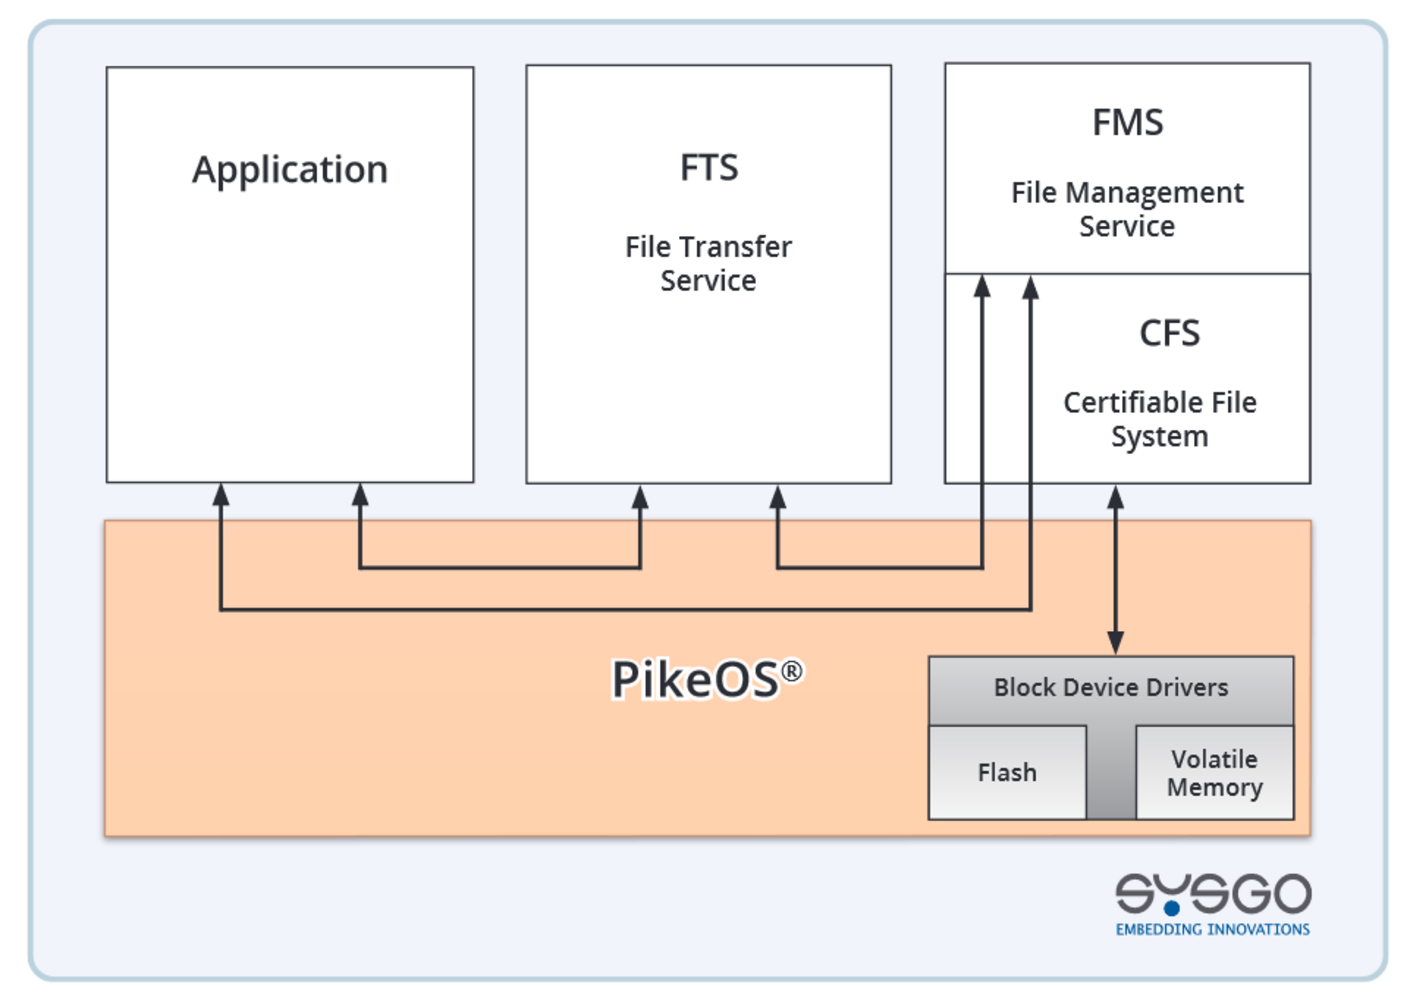 PikeOS FTS, FMS, CFS Architecture